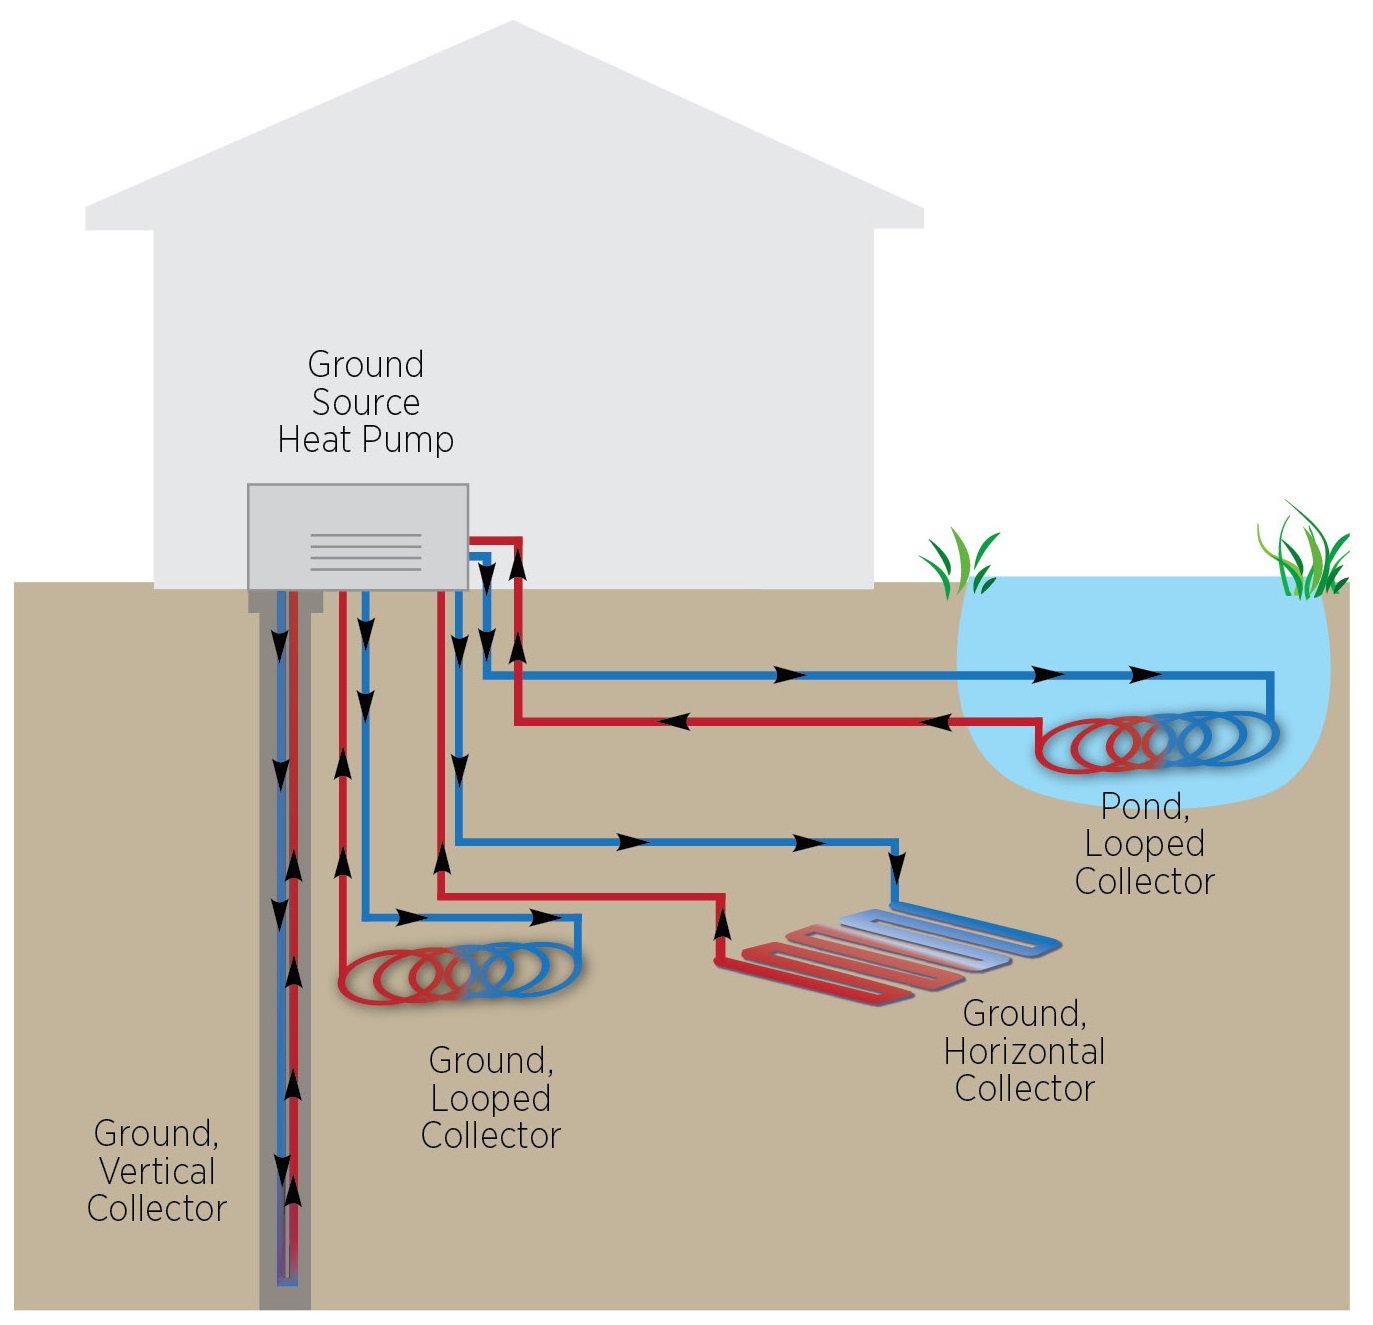 A ground source heat pump draws heat from or dumps heat into the ground, groundwater, or surface water.